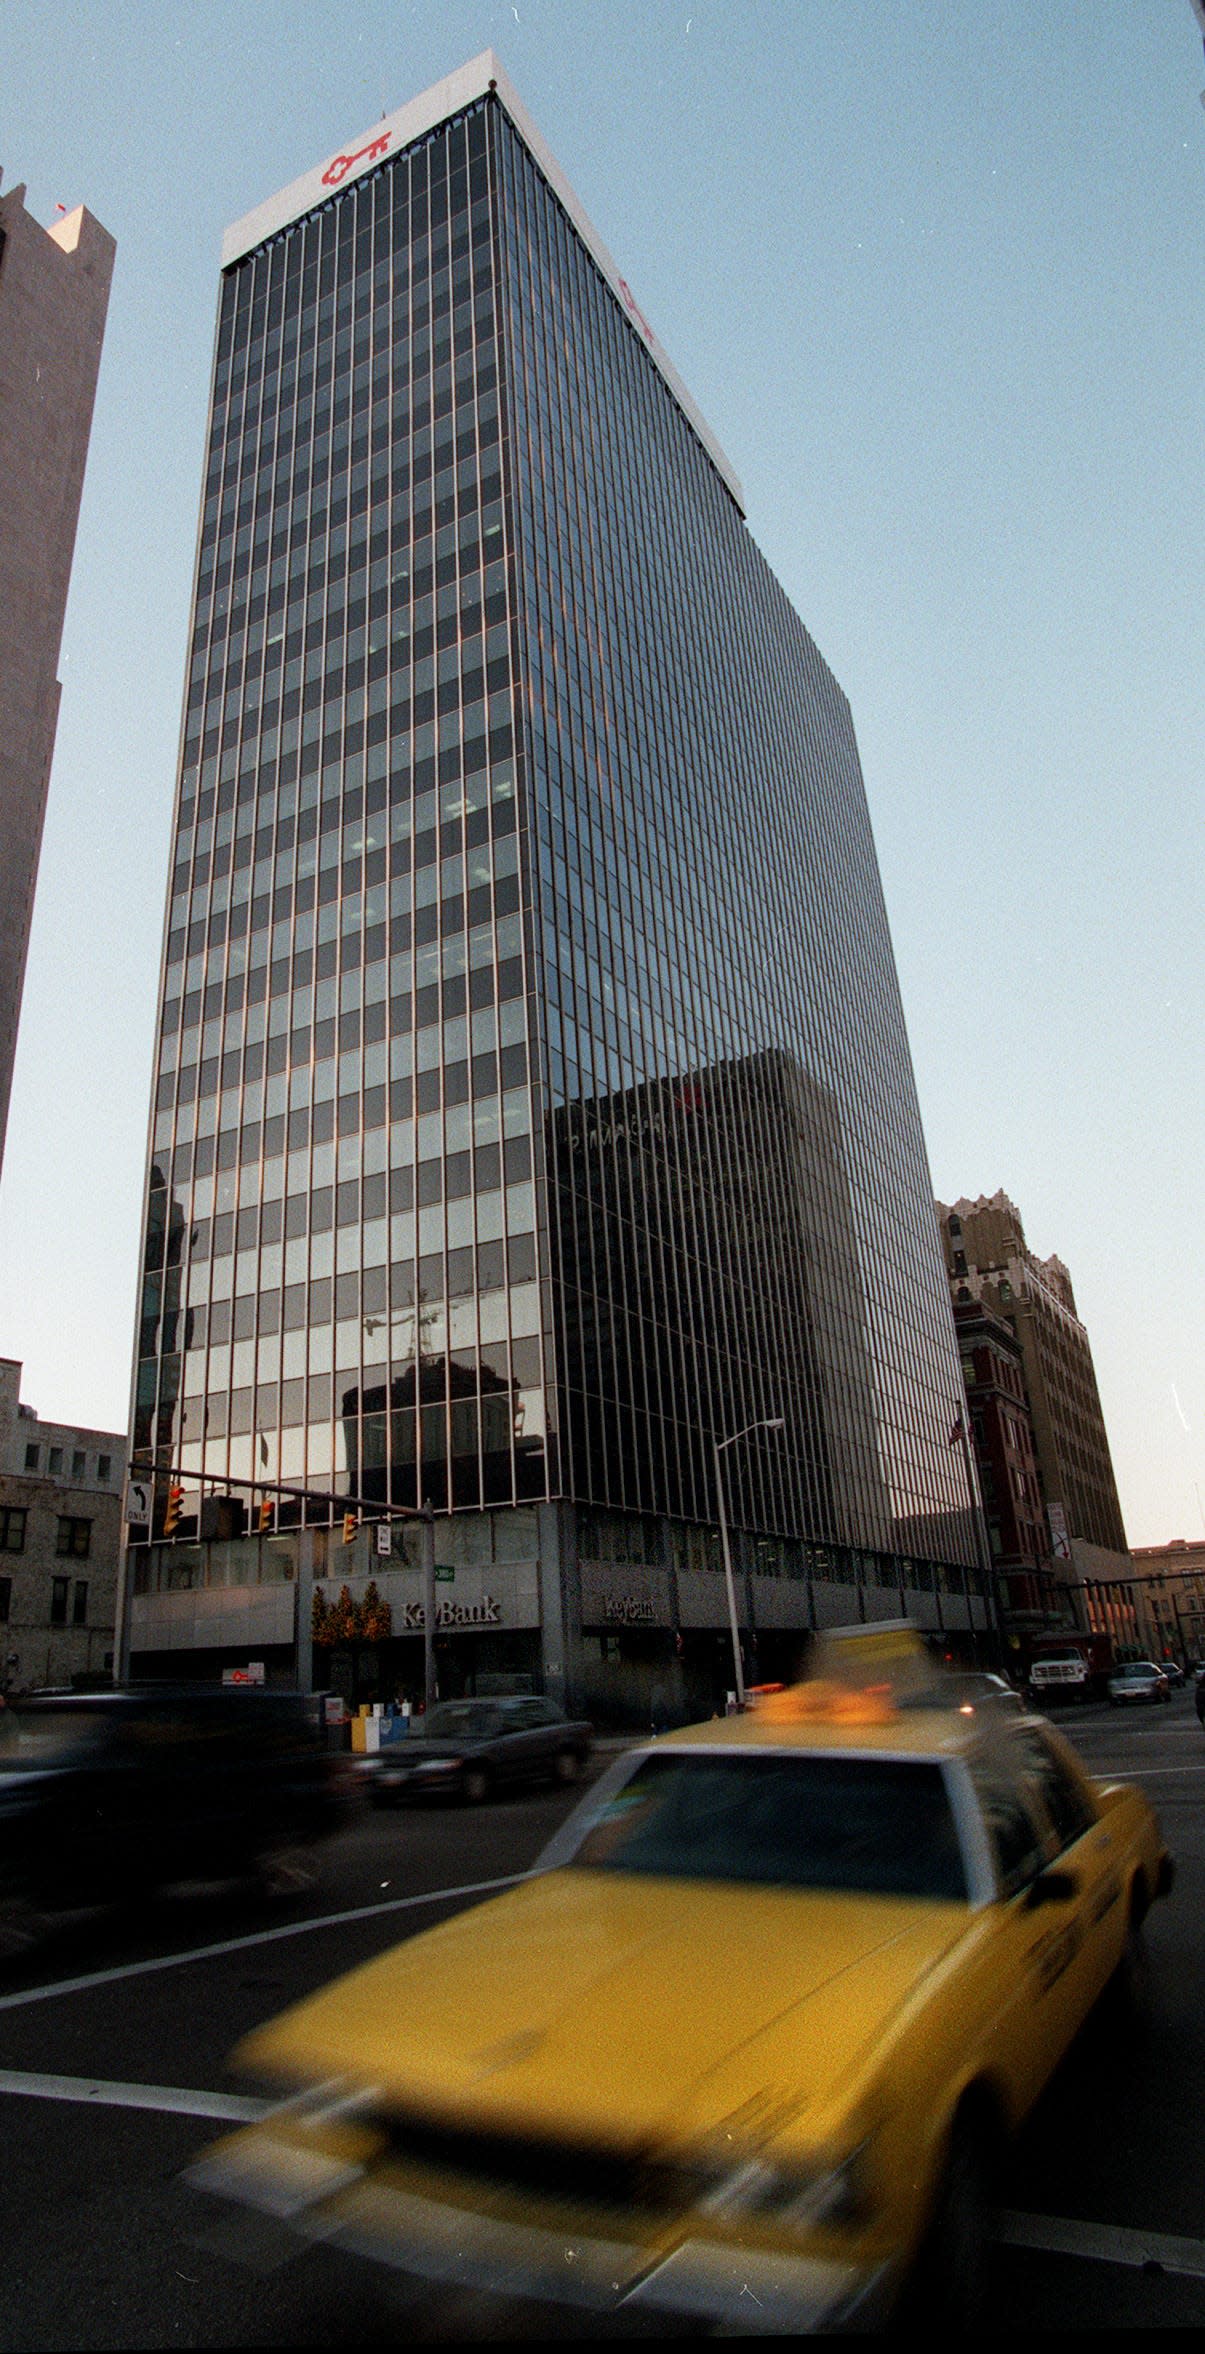 The KeyBank building, photographed in 1997